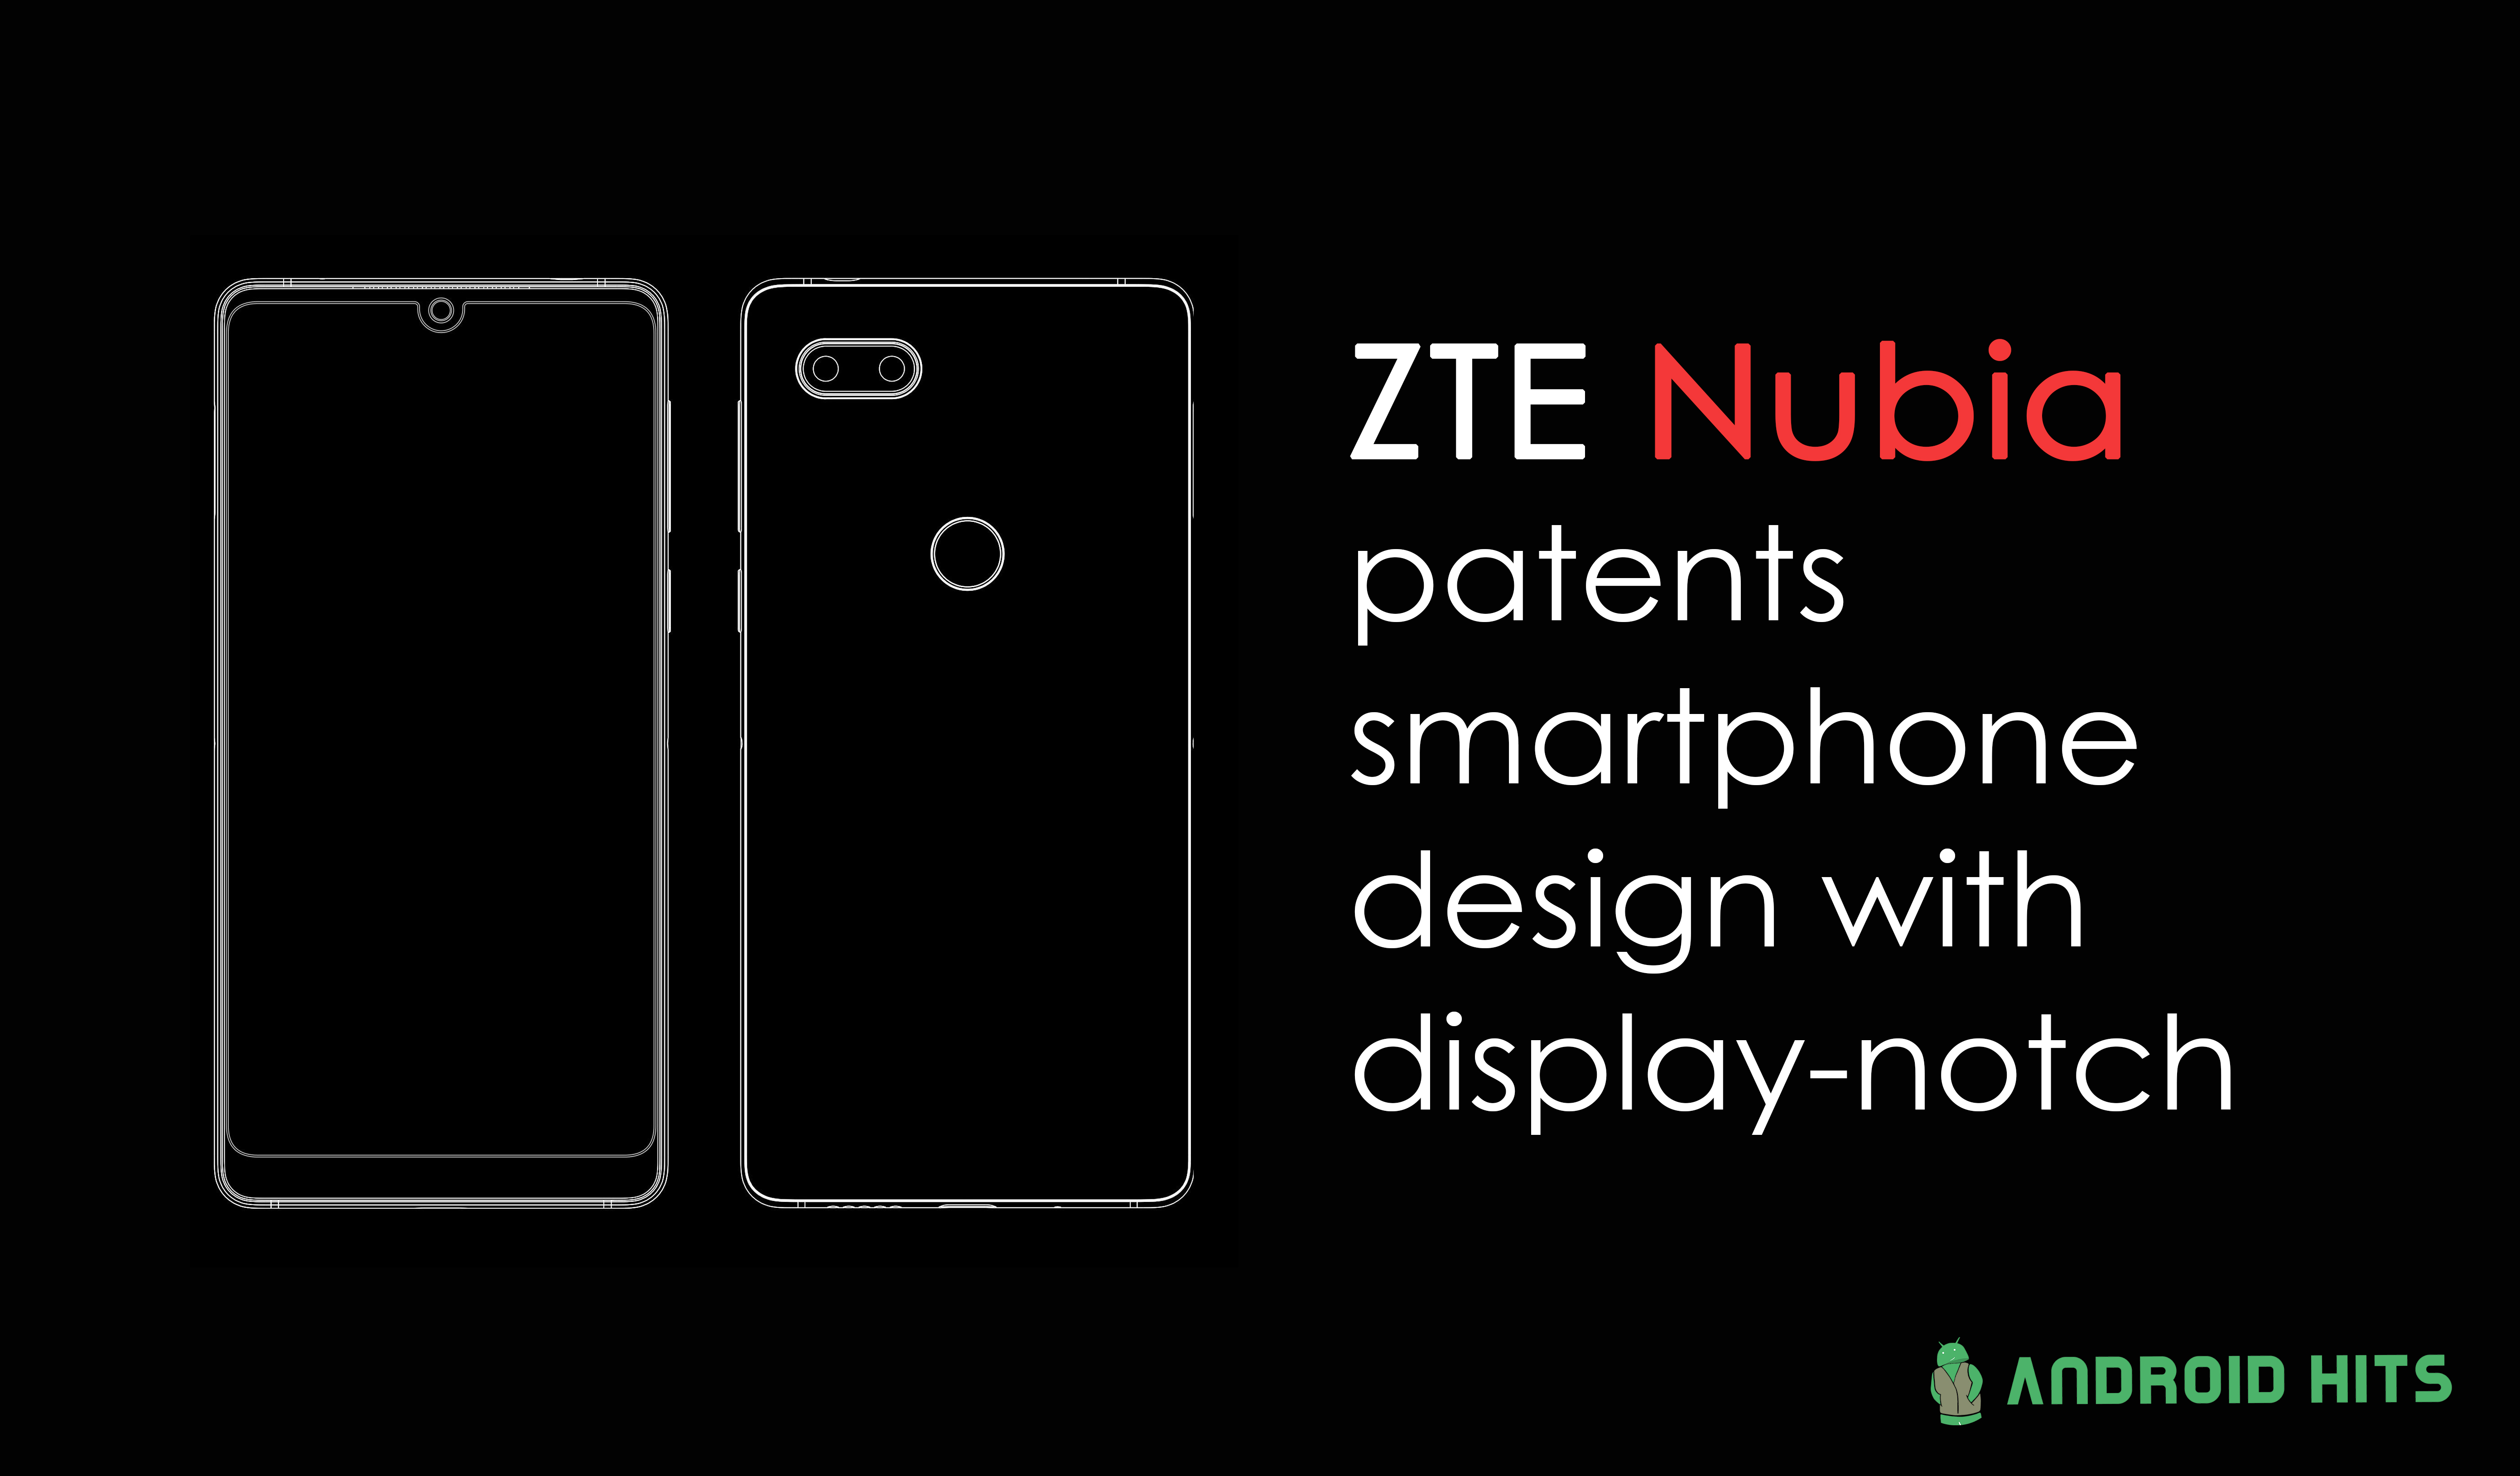 ZTE Nubia patents smartphone design with display-notch; could be Nubia Z19 6